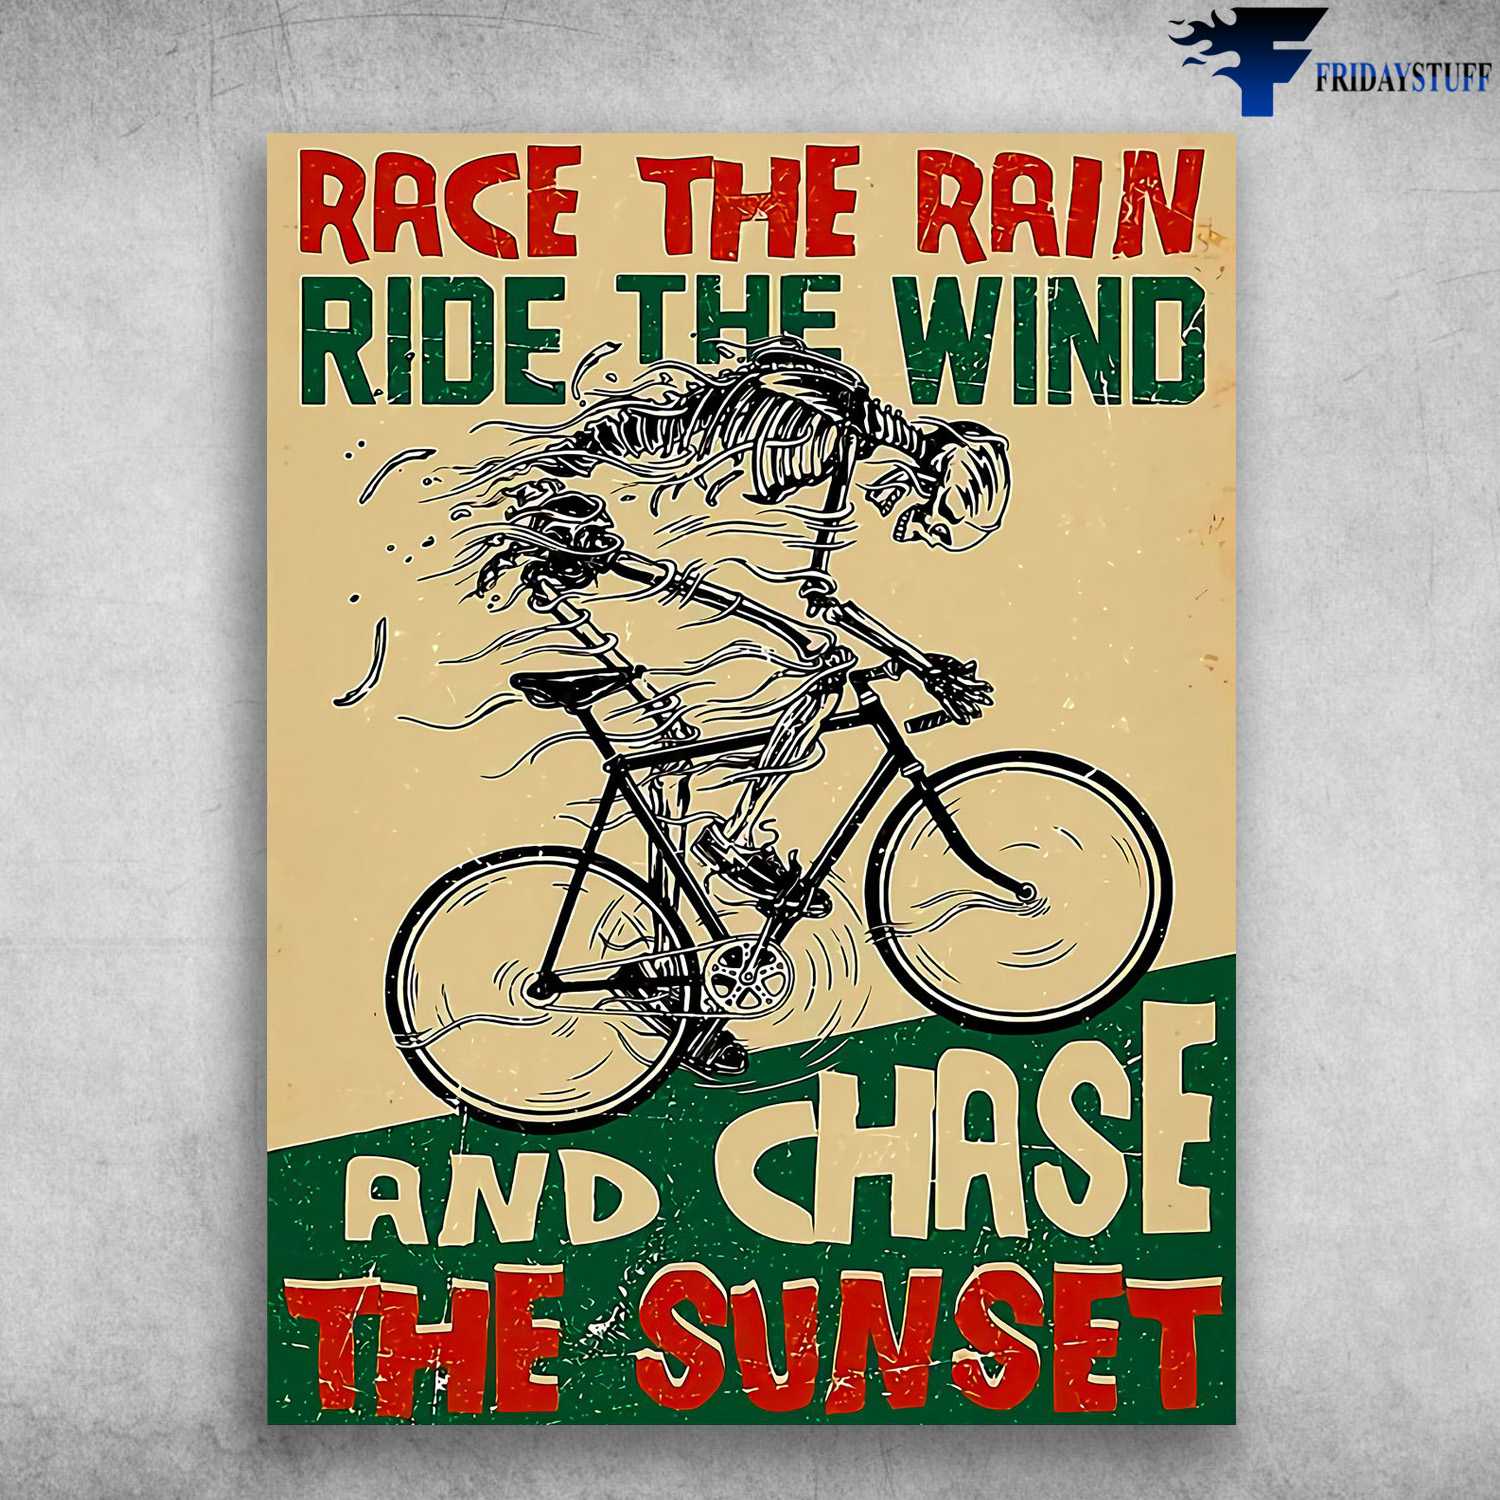 Bicycle Poster, Cycling Skeleton - Race The Rain, Ride The Wind, And Chase, The Sunset